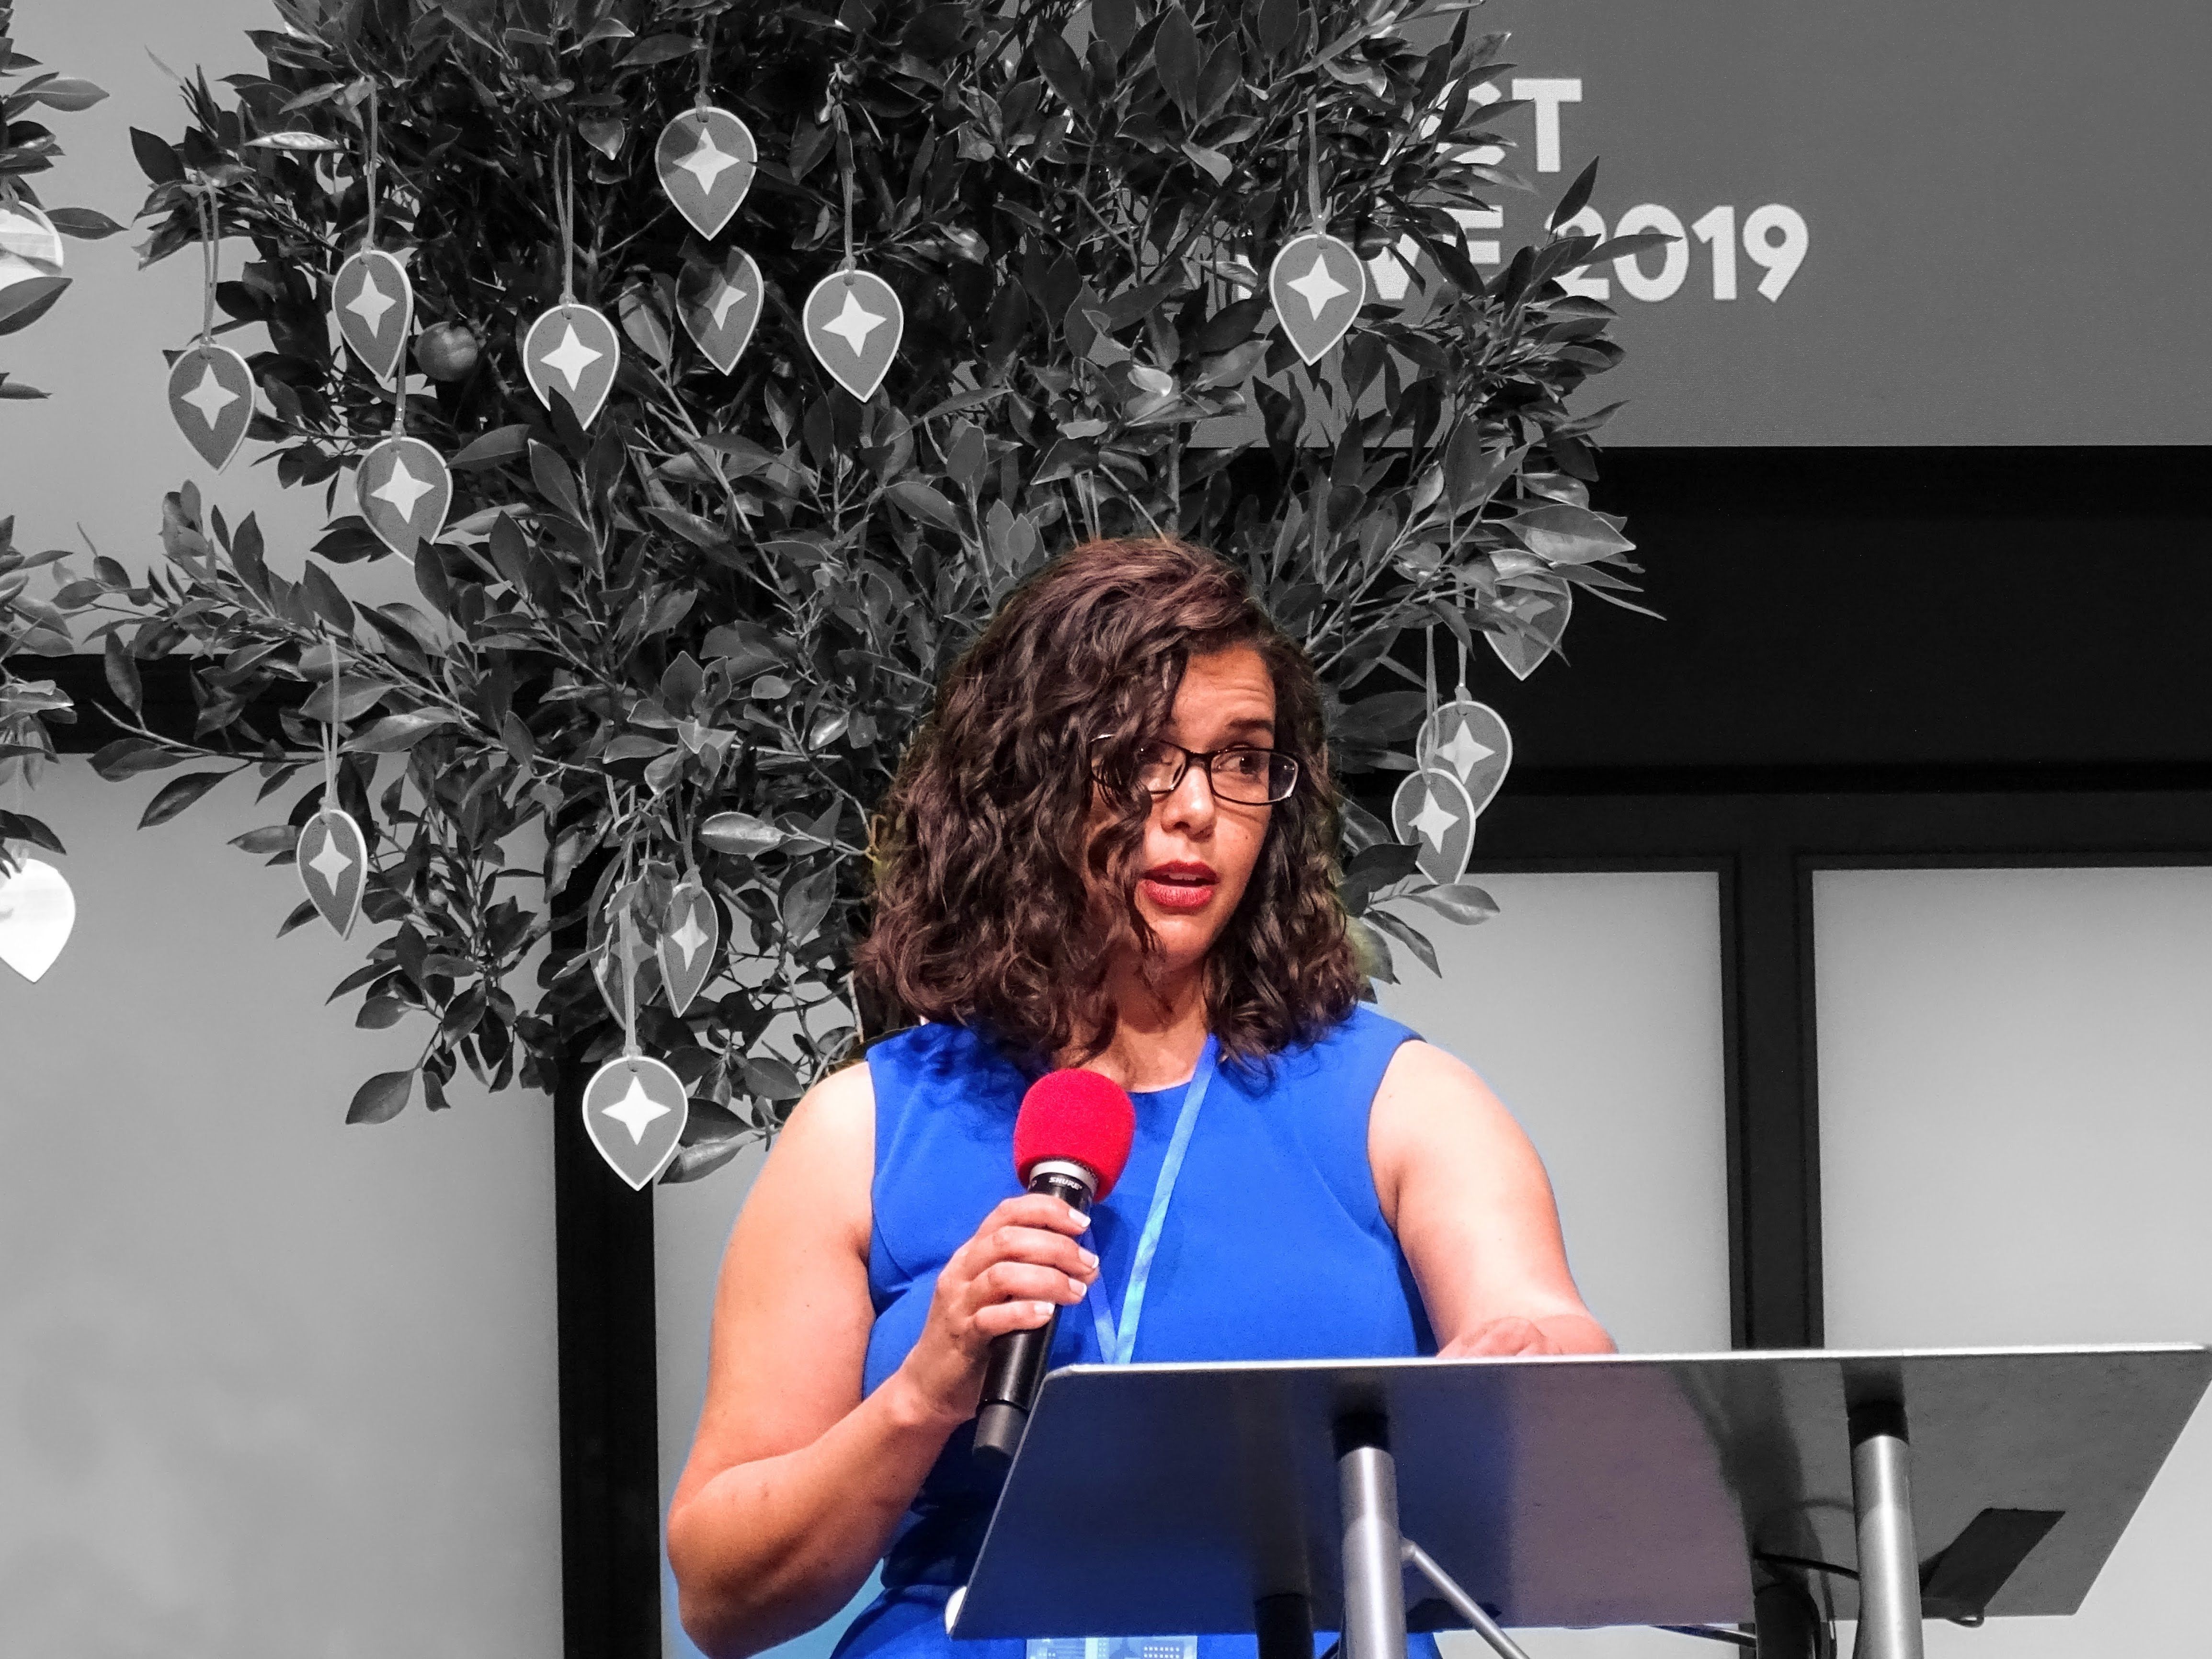 Caption: A photo of Local Guide Megan giving a speech on the stage of Connect Live 2019 - Photo @ermest